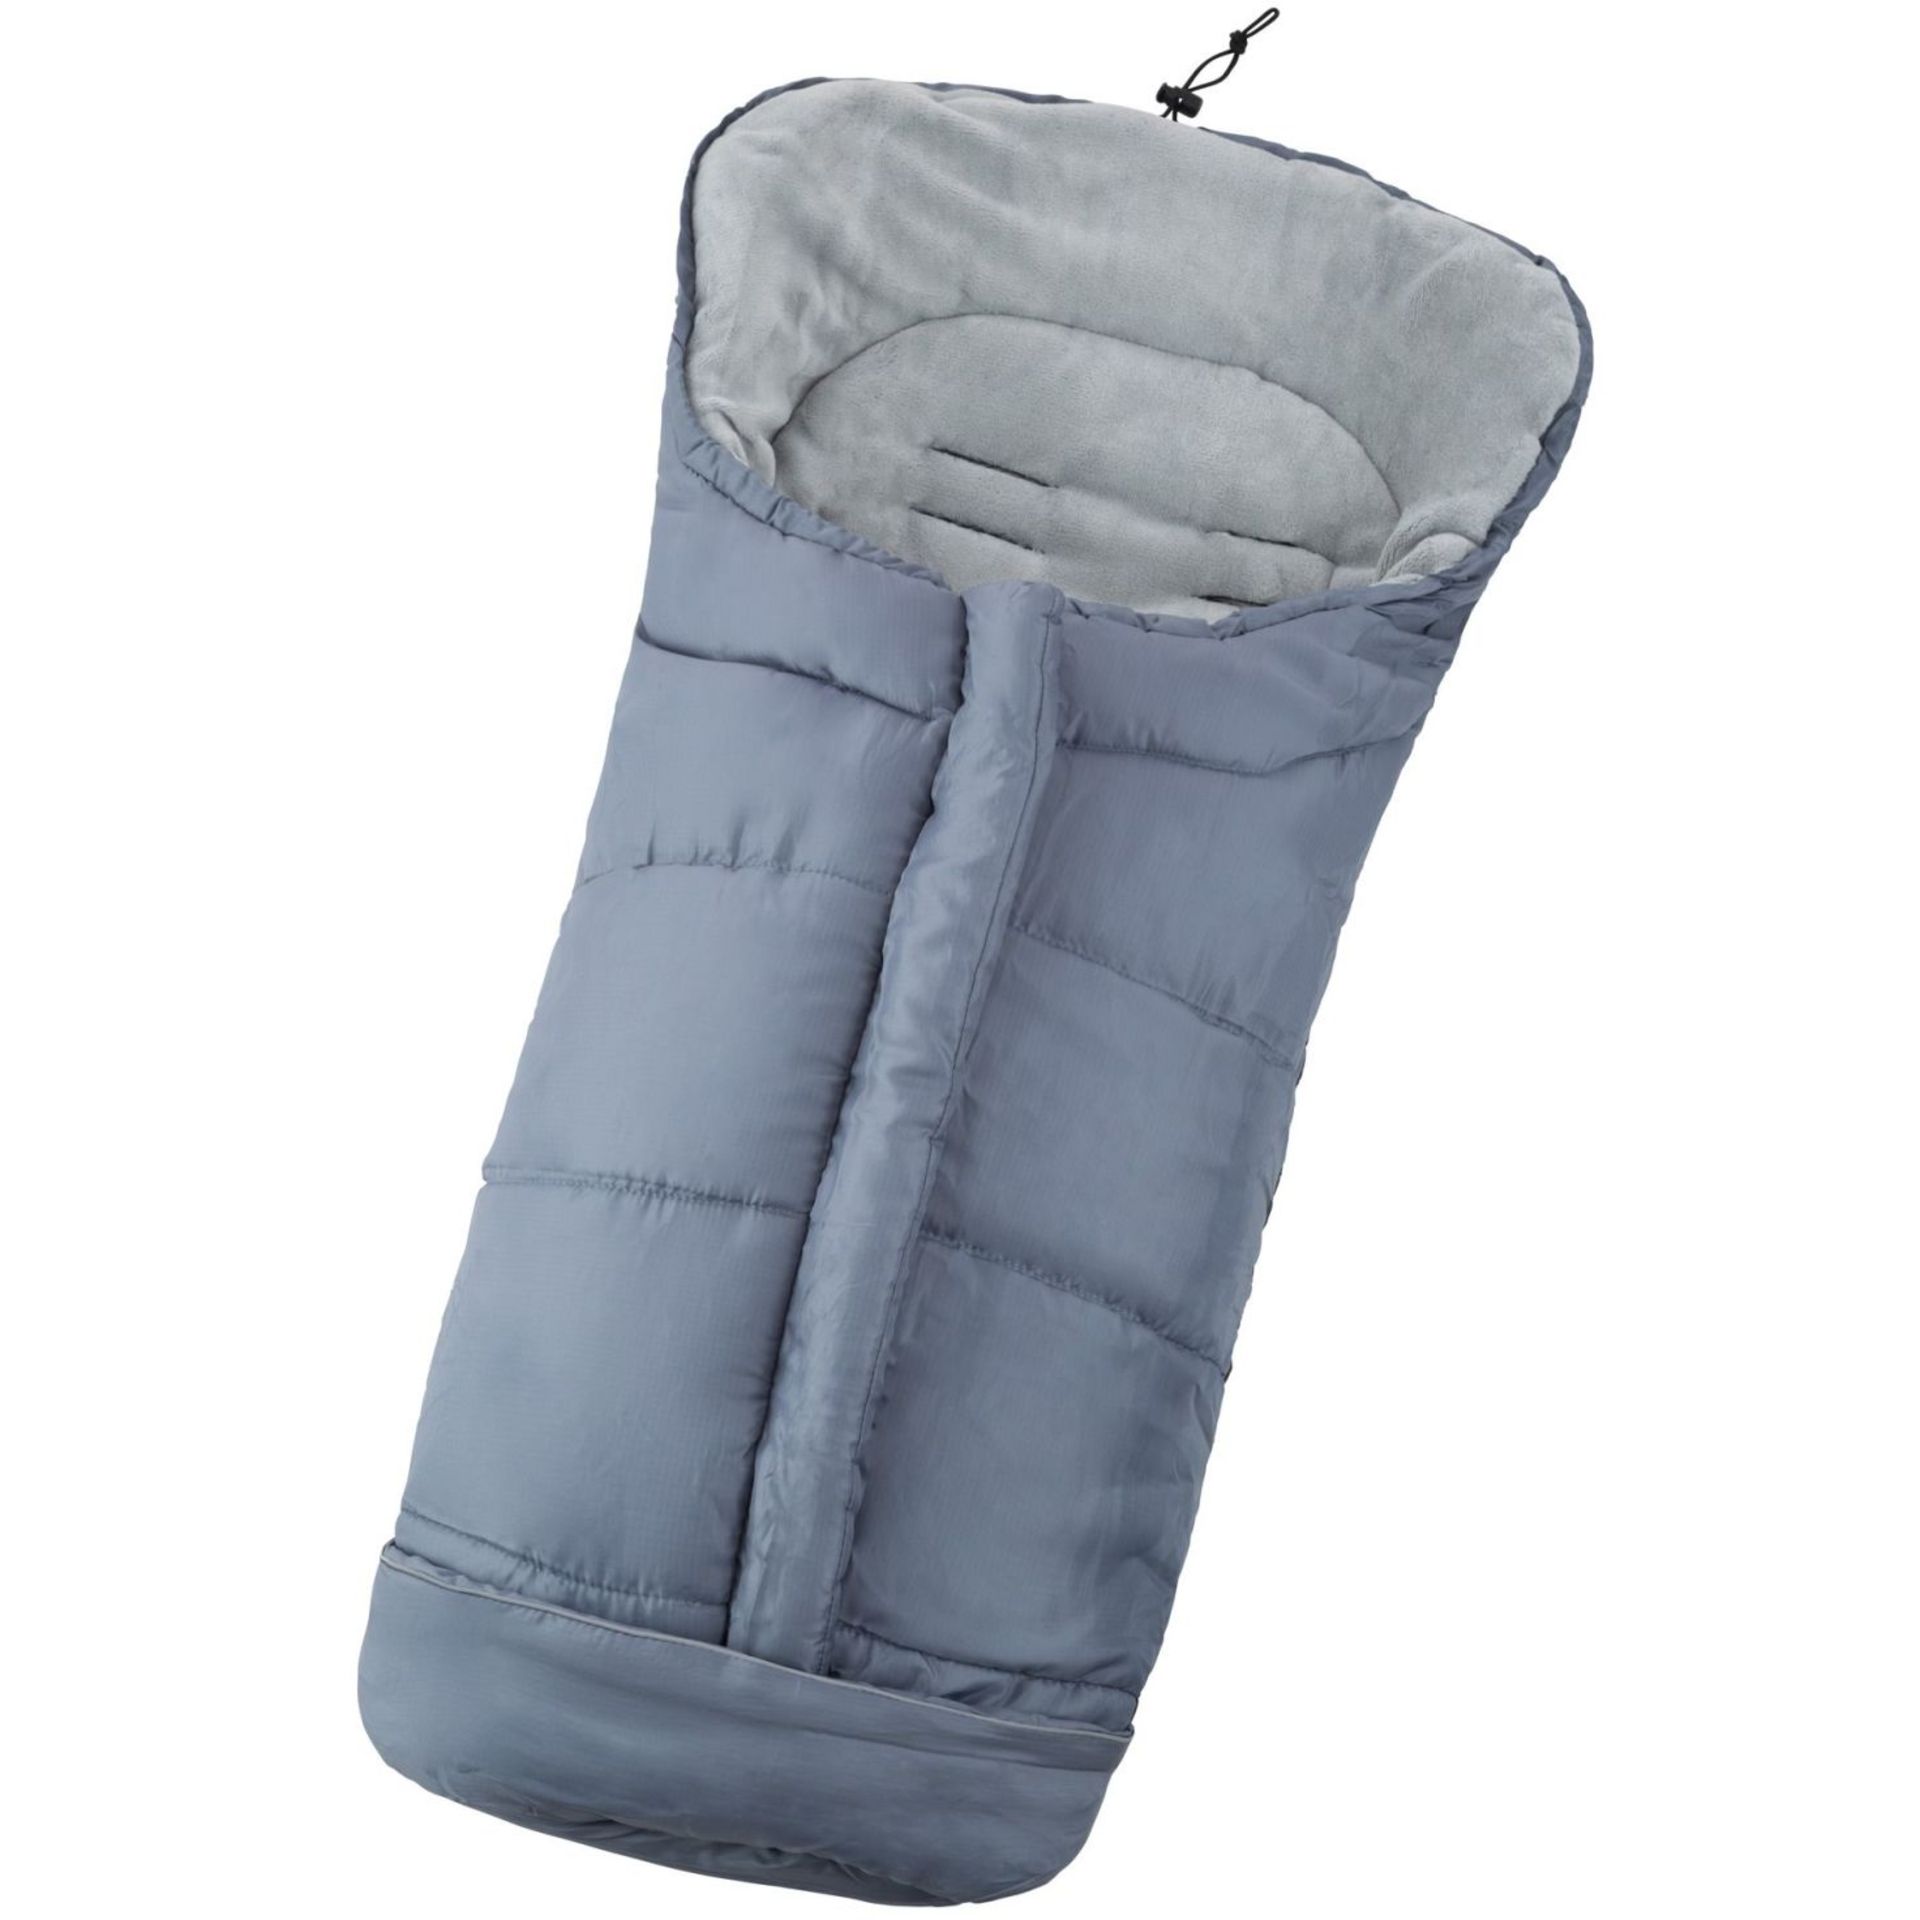 Tectake - Footmuff With Thermal Insulation Grey - Boxed. RRP £29.99